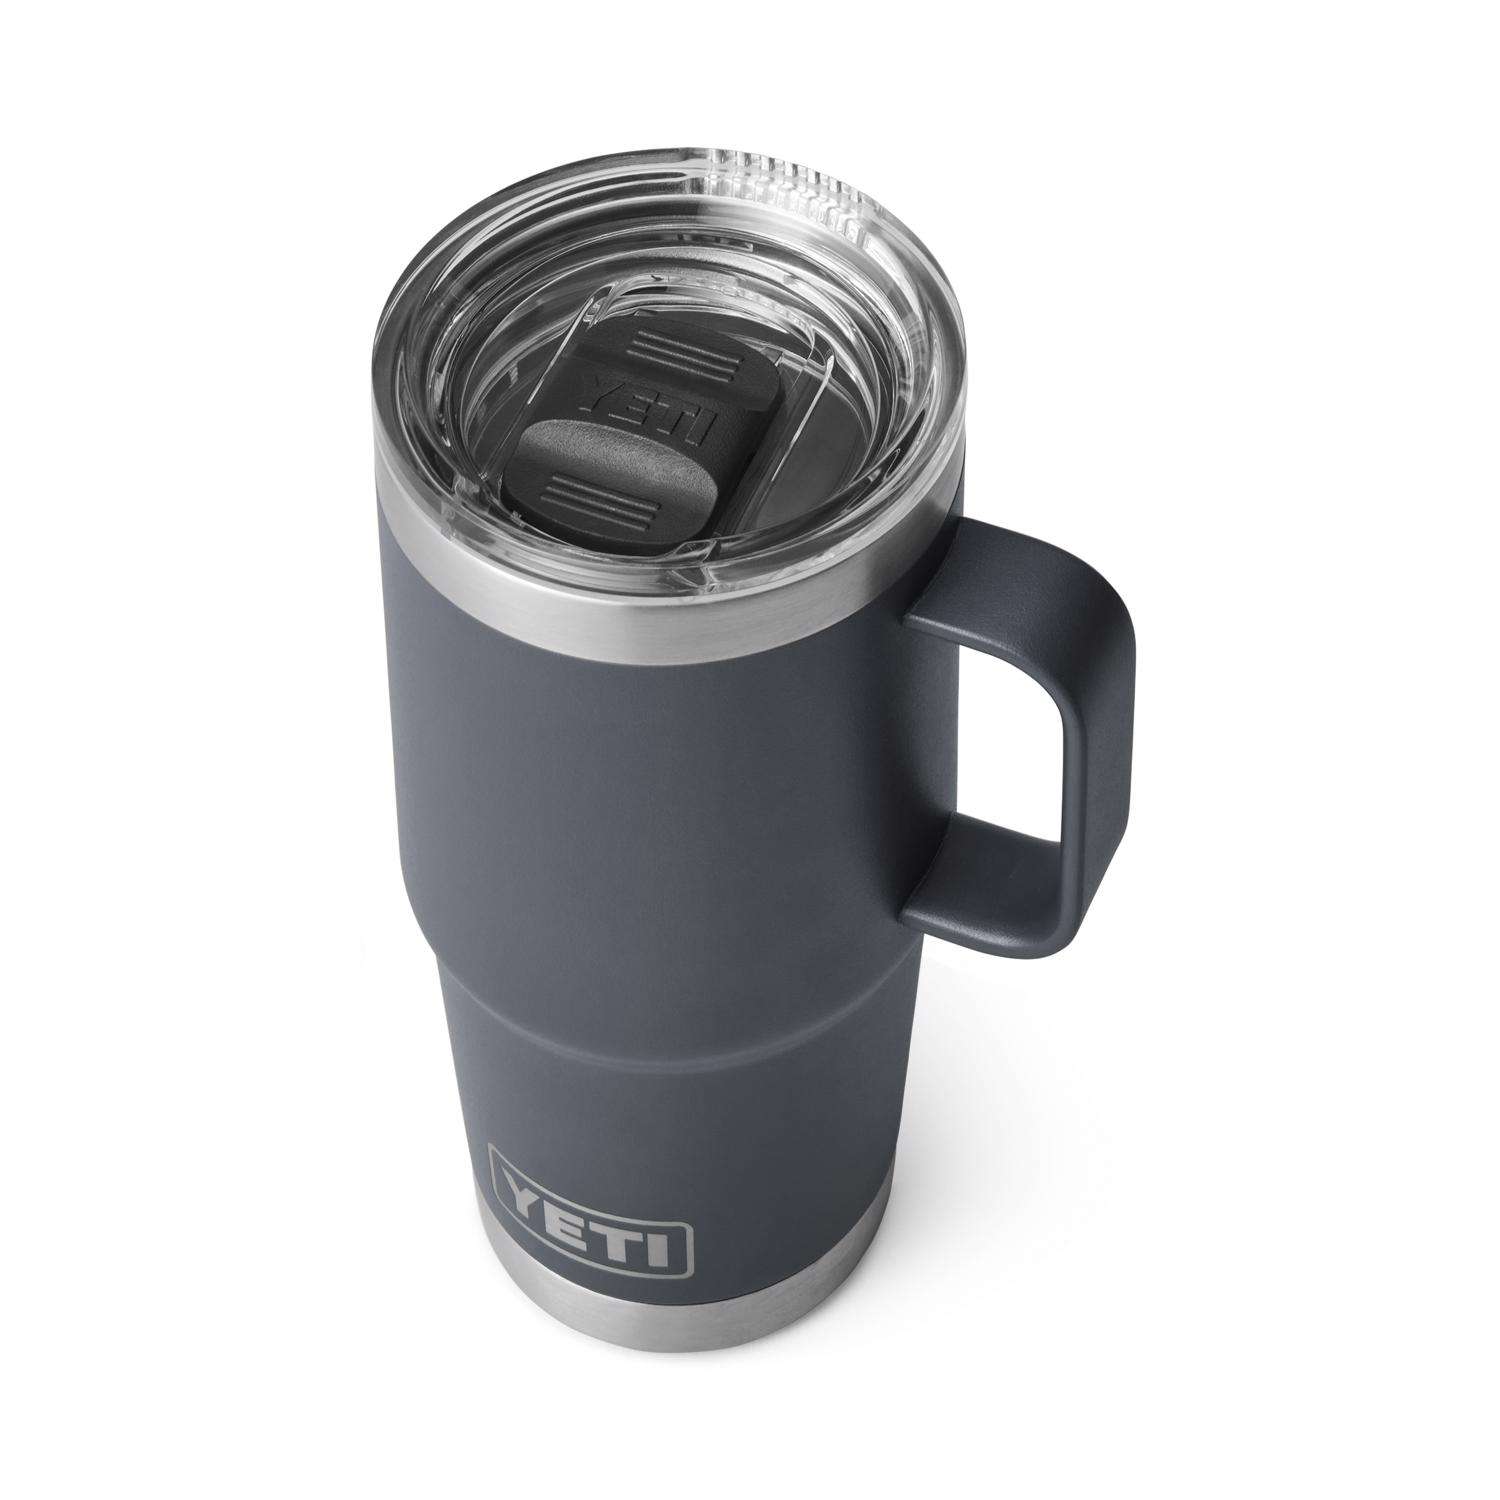 Available for pickup in the Tap Room only YETI 20 OZ Rambler Tumbler